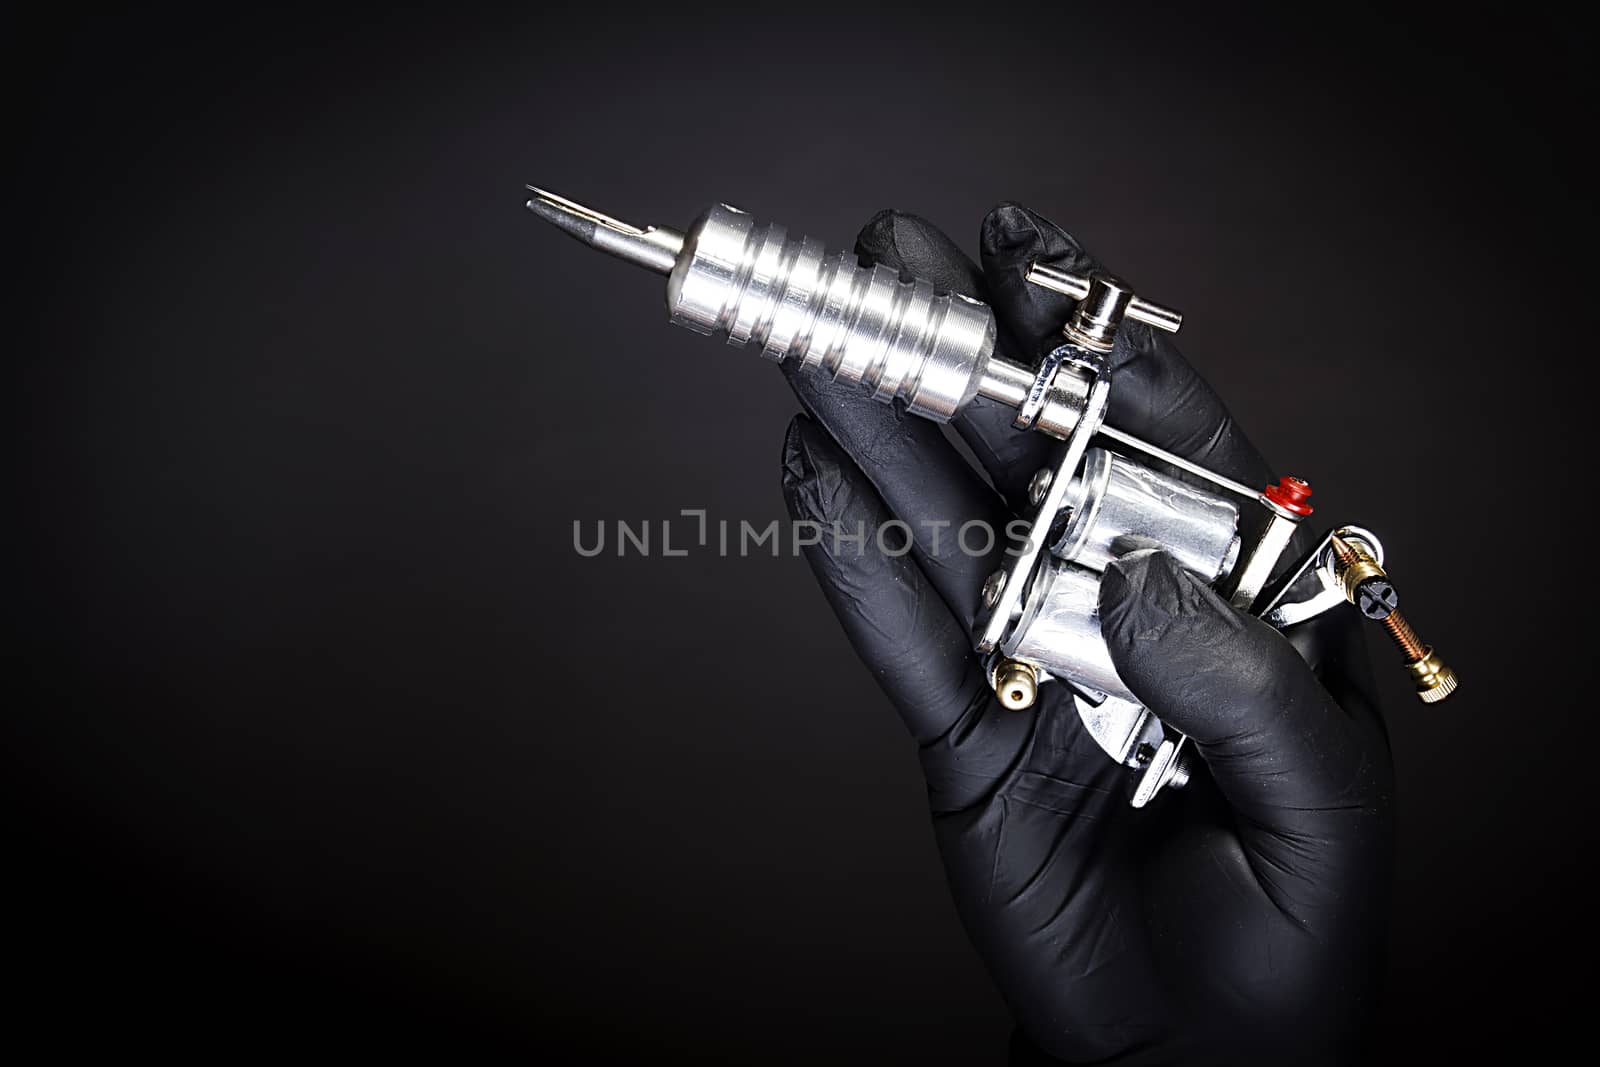 Tattoo machine in artist’s hand isolated on black background